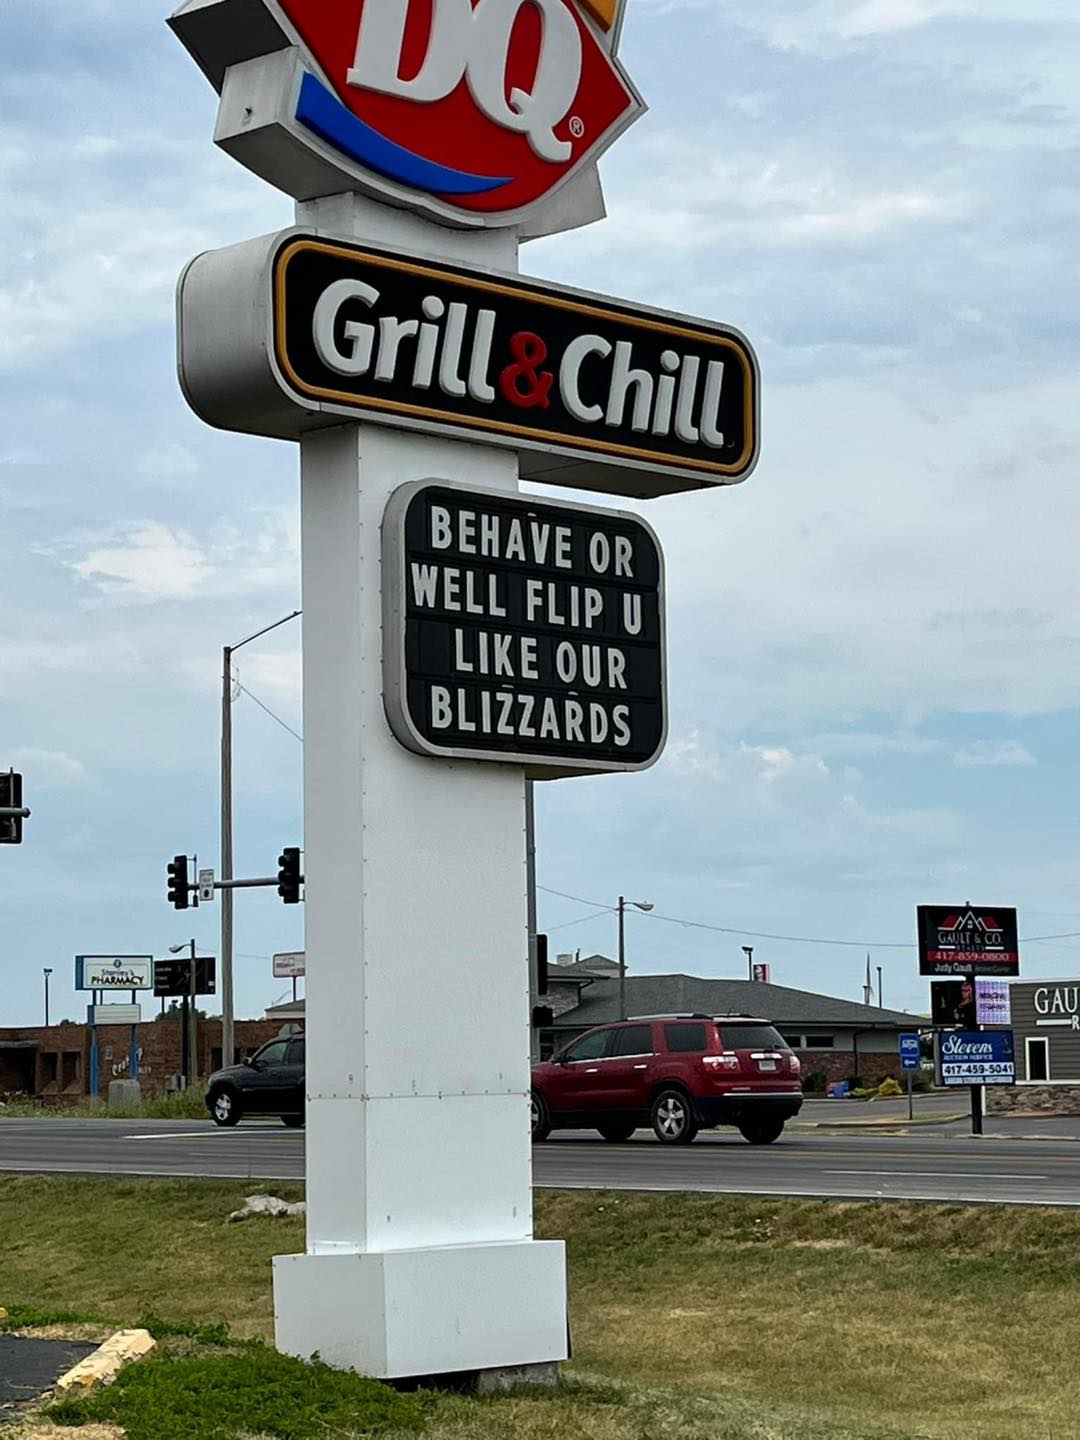 DQ sign that says: "behave or well filp u like our blizzards."